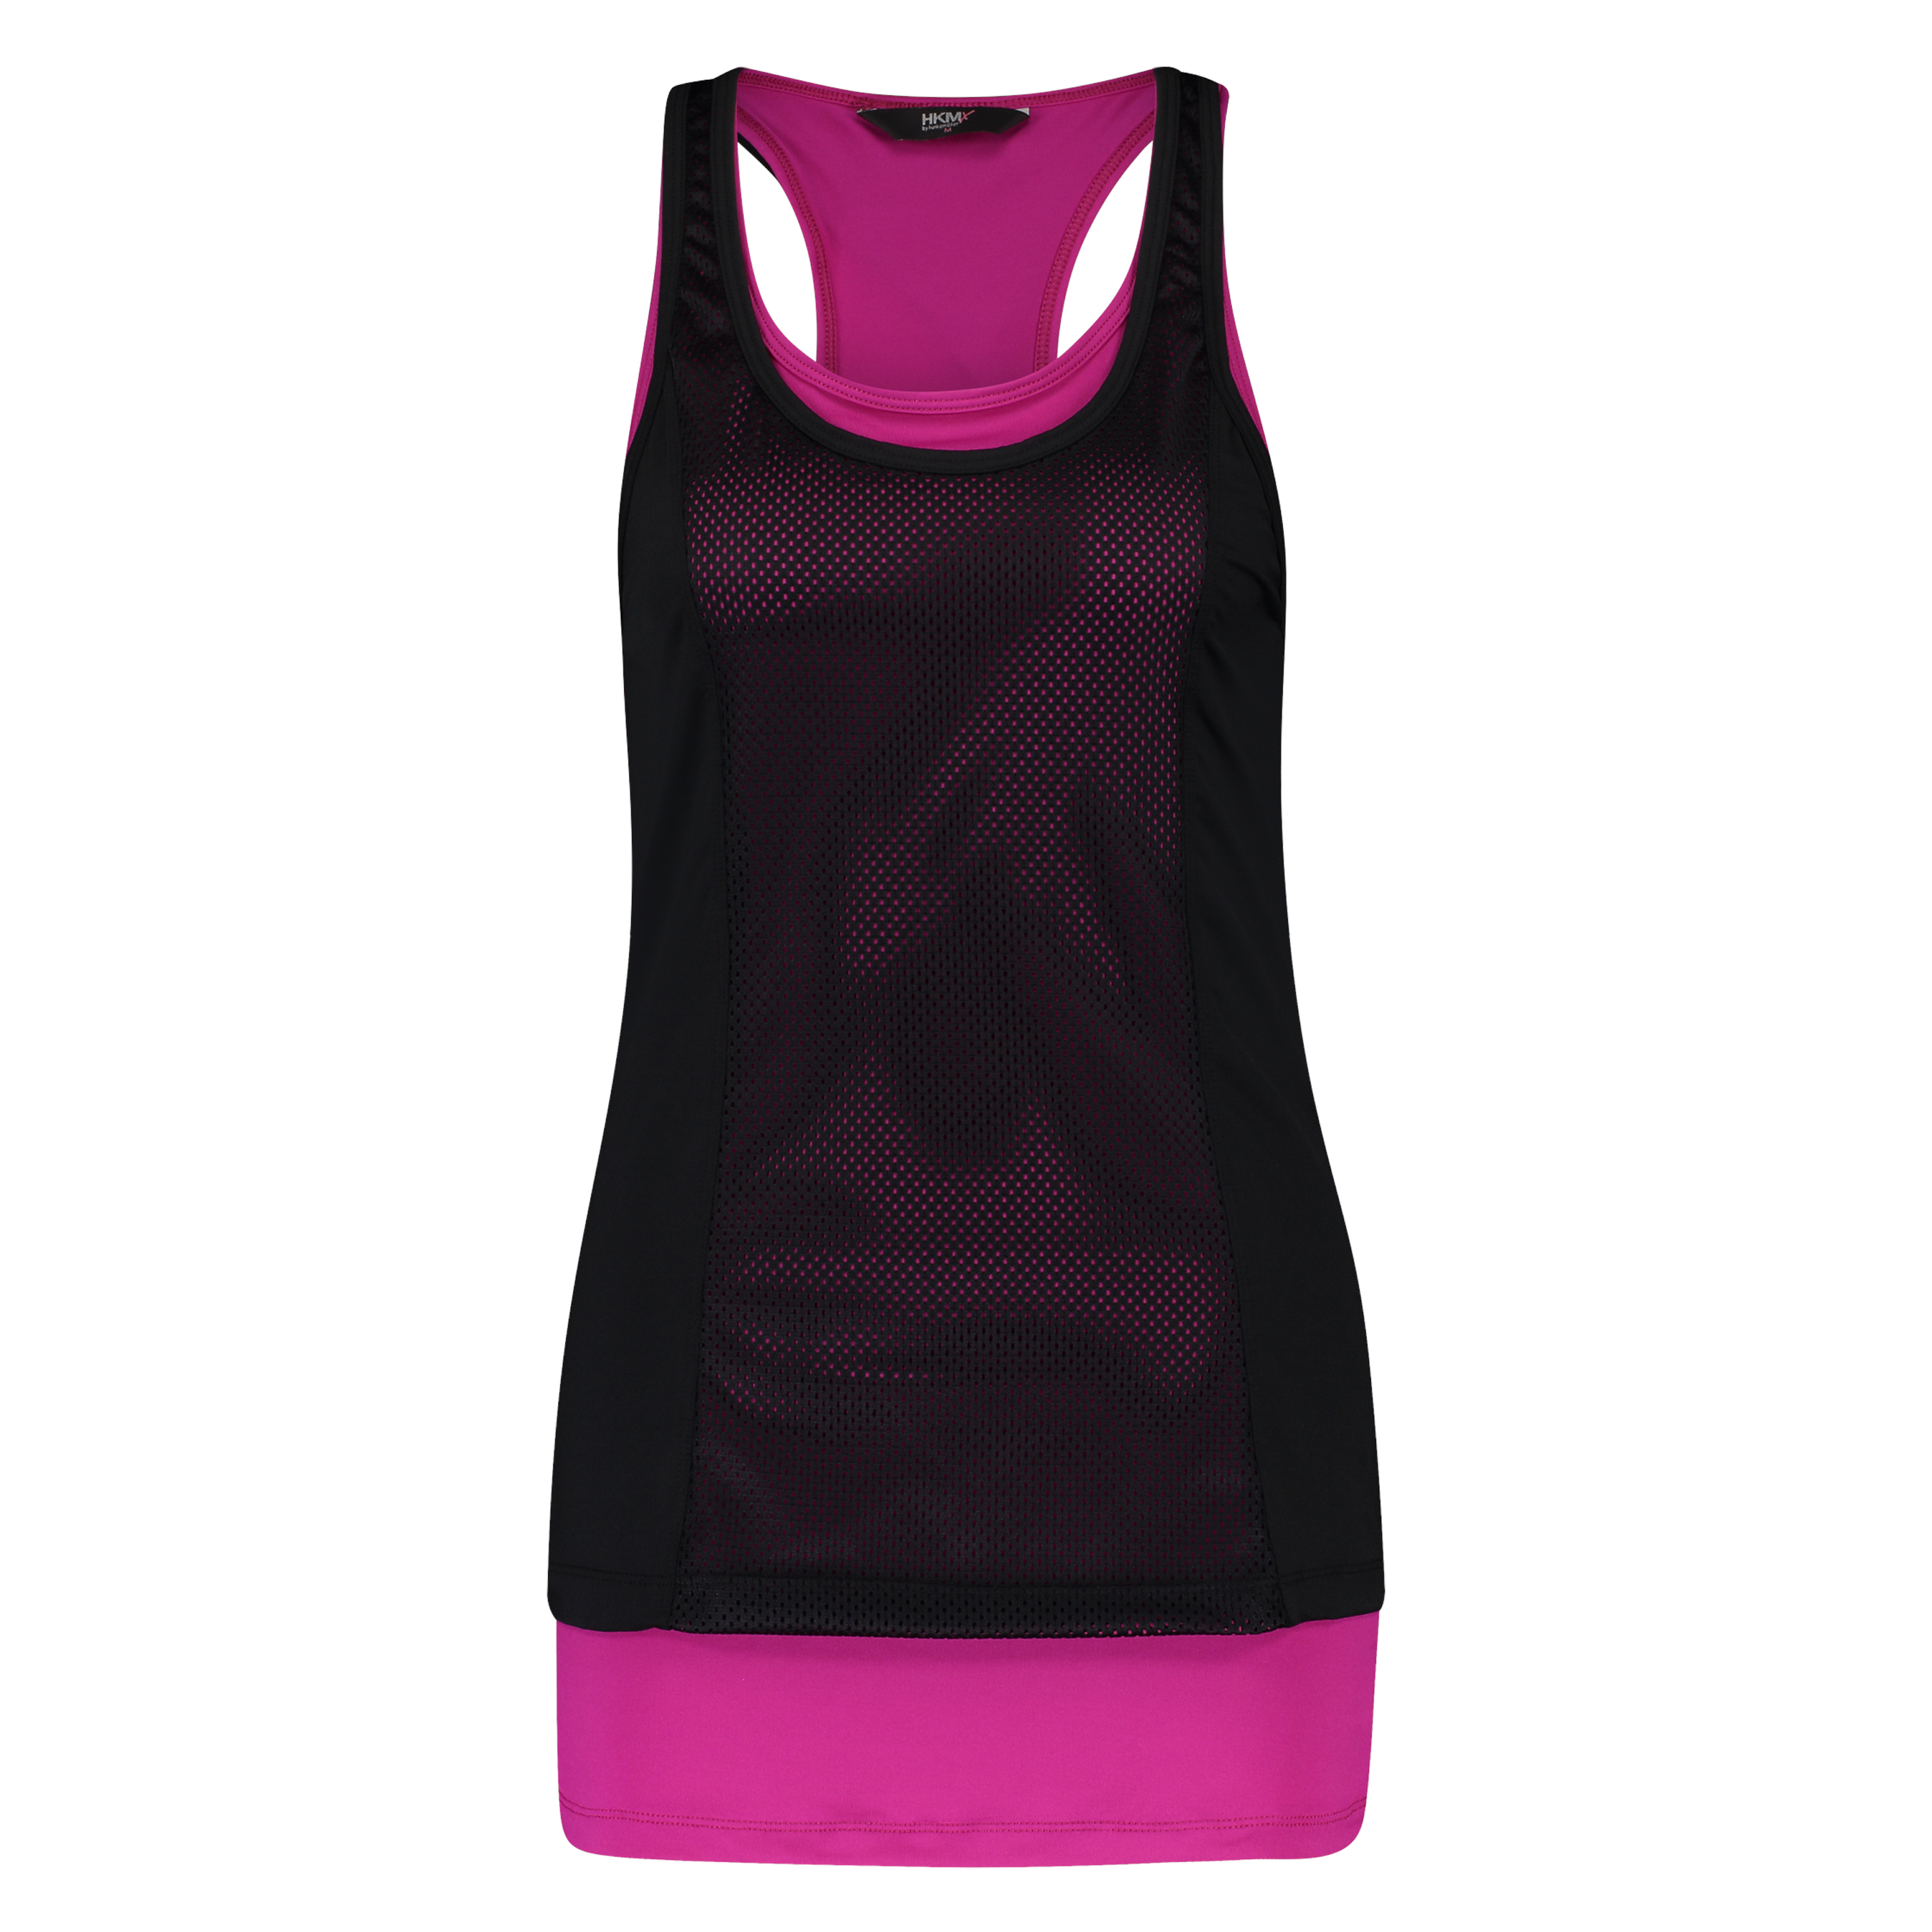 HKMX Sports Top, Fioletowy, main